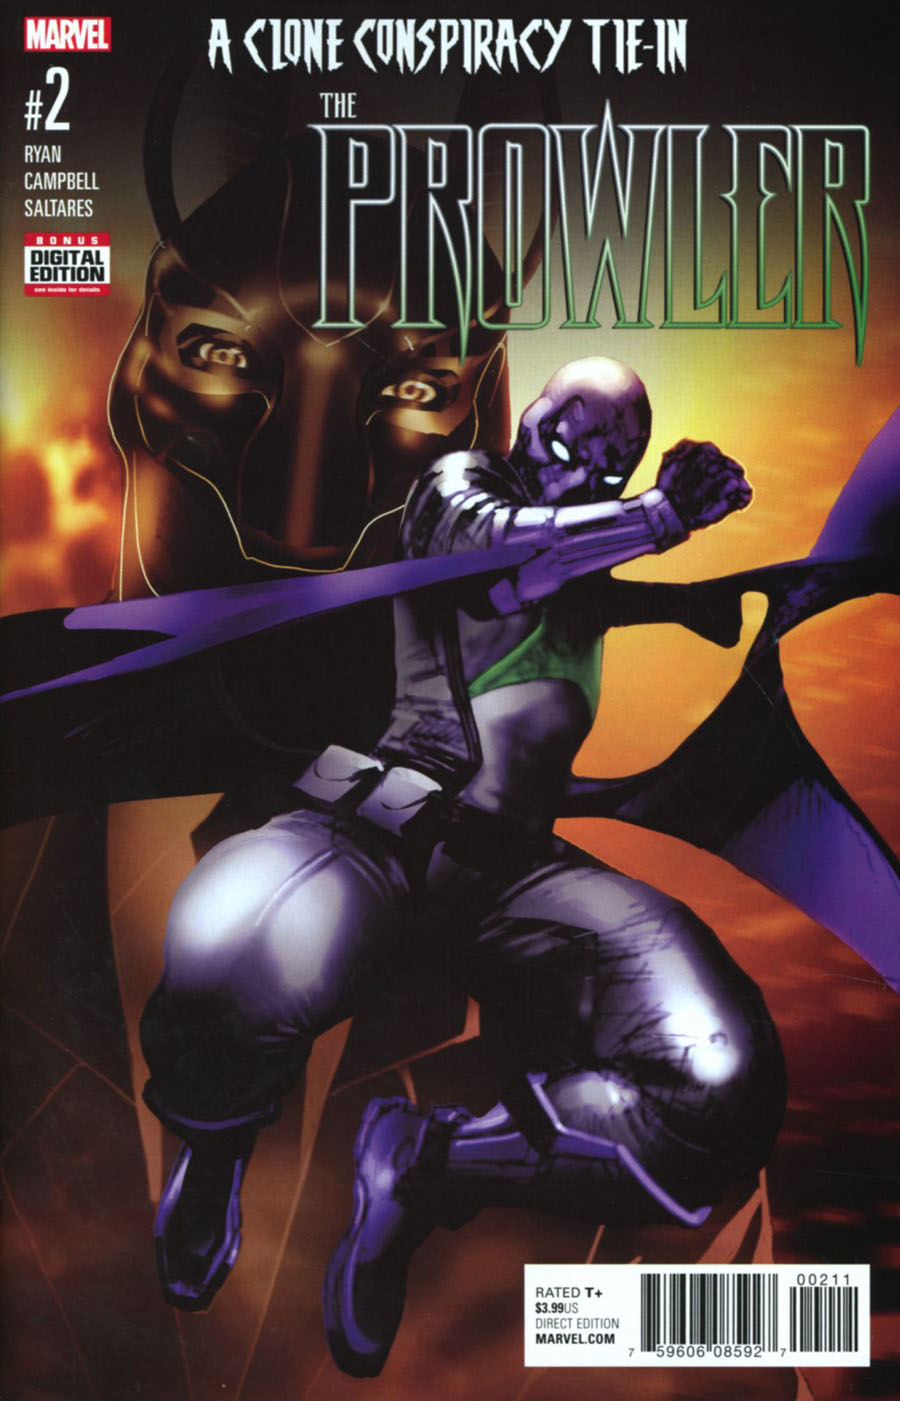 Prowler (Marvel) Vol 2 #2 Cover A Regular Travel Foreman Cover (Clone Conspiracy Tie-In)